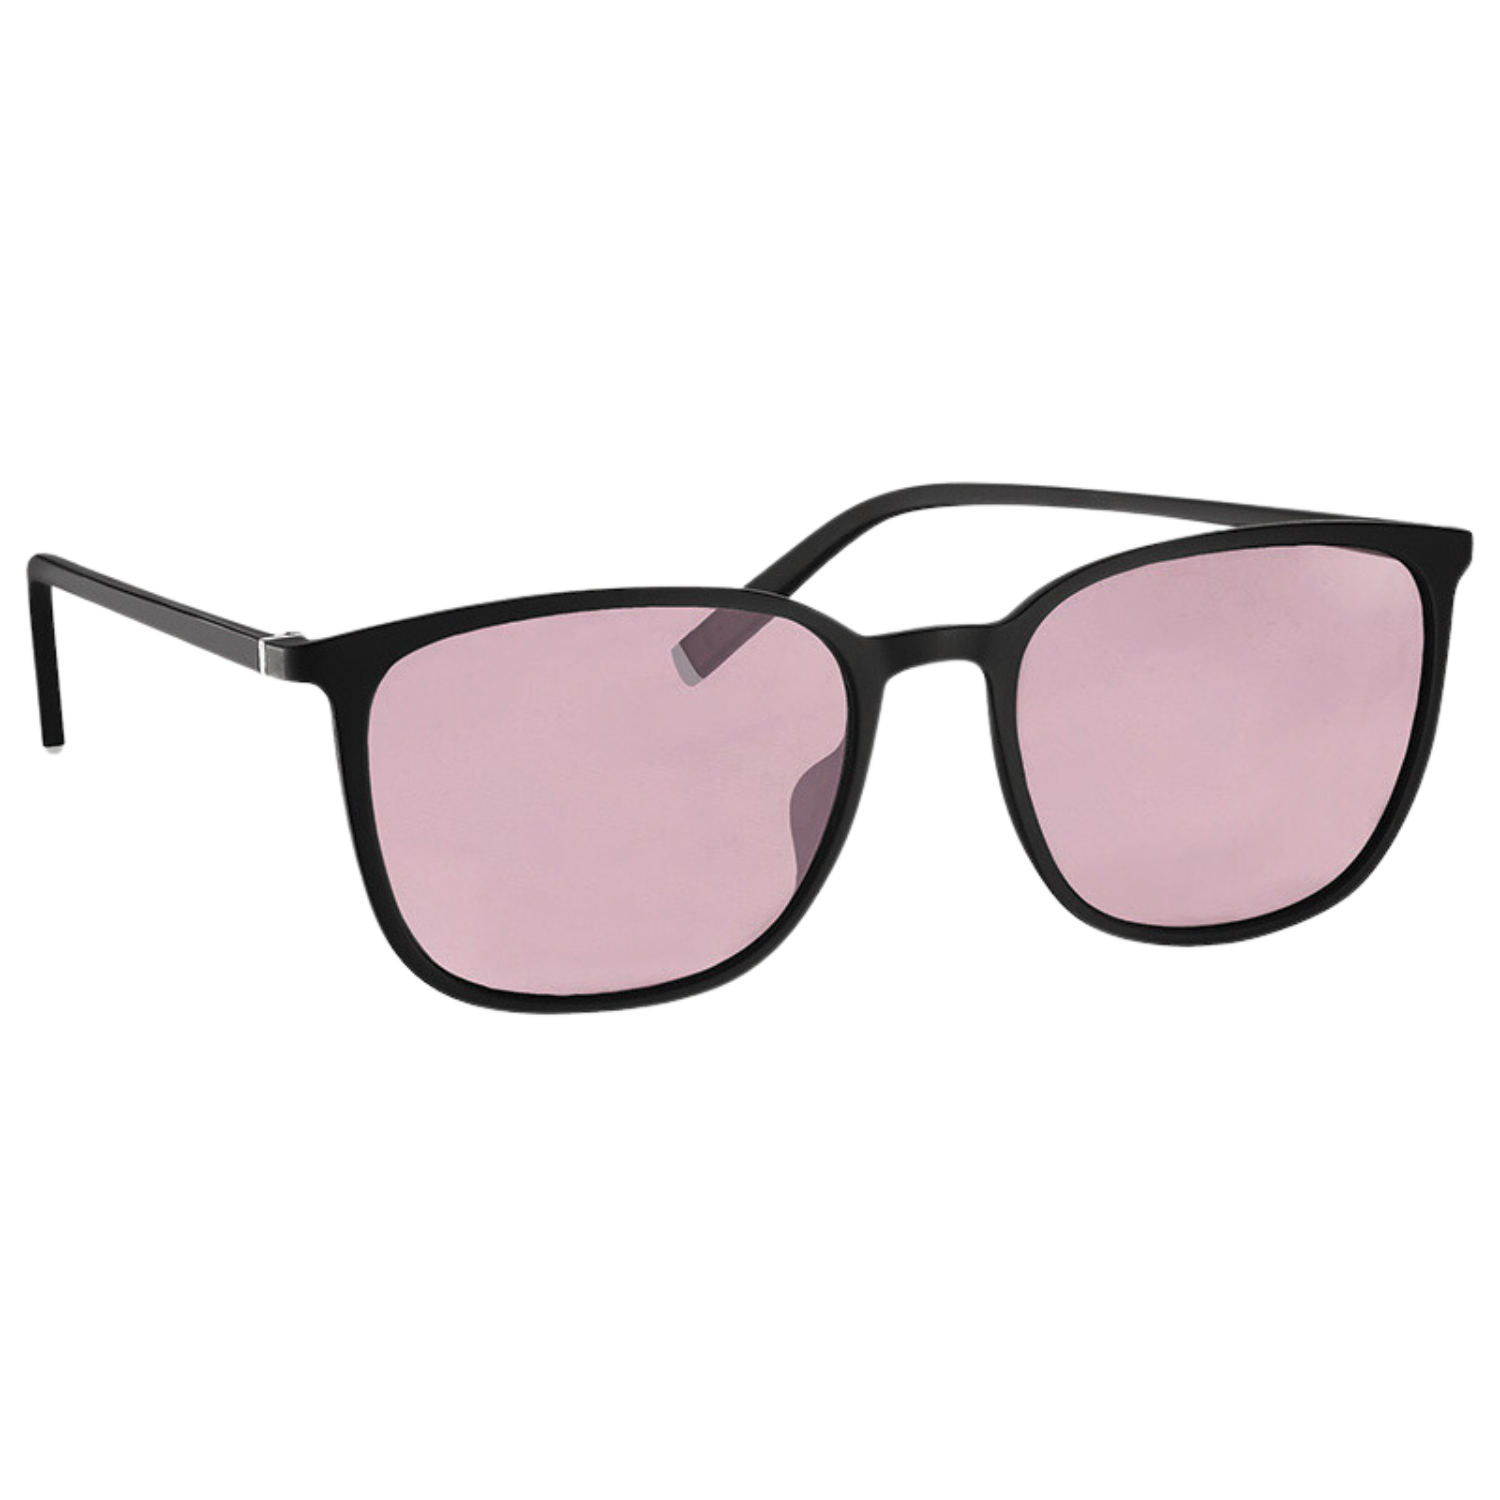 Image of the Acunis FL-41 Light Sensitivity Glasses from Eschenbach with ahtracite acetate frame and 25% light absorption.